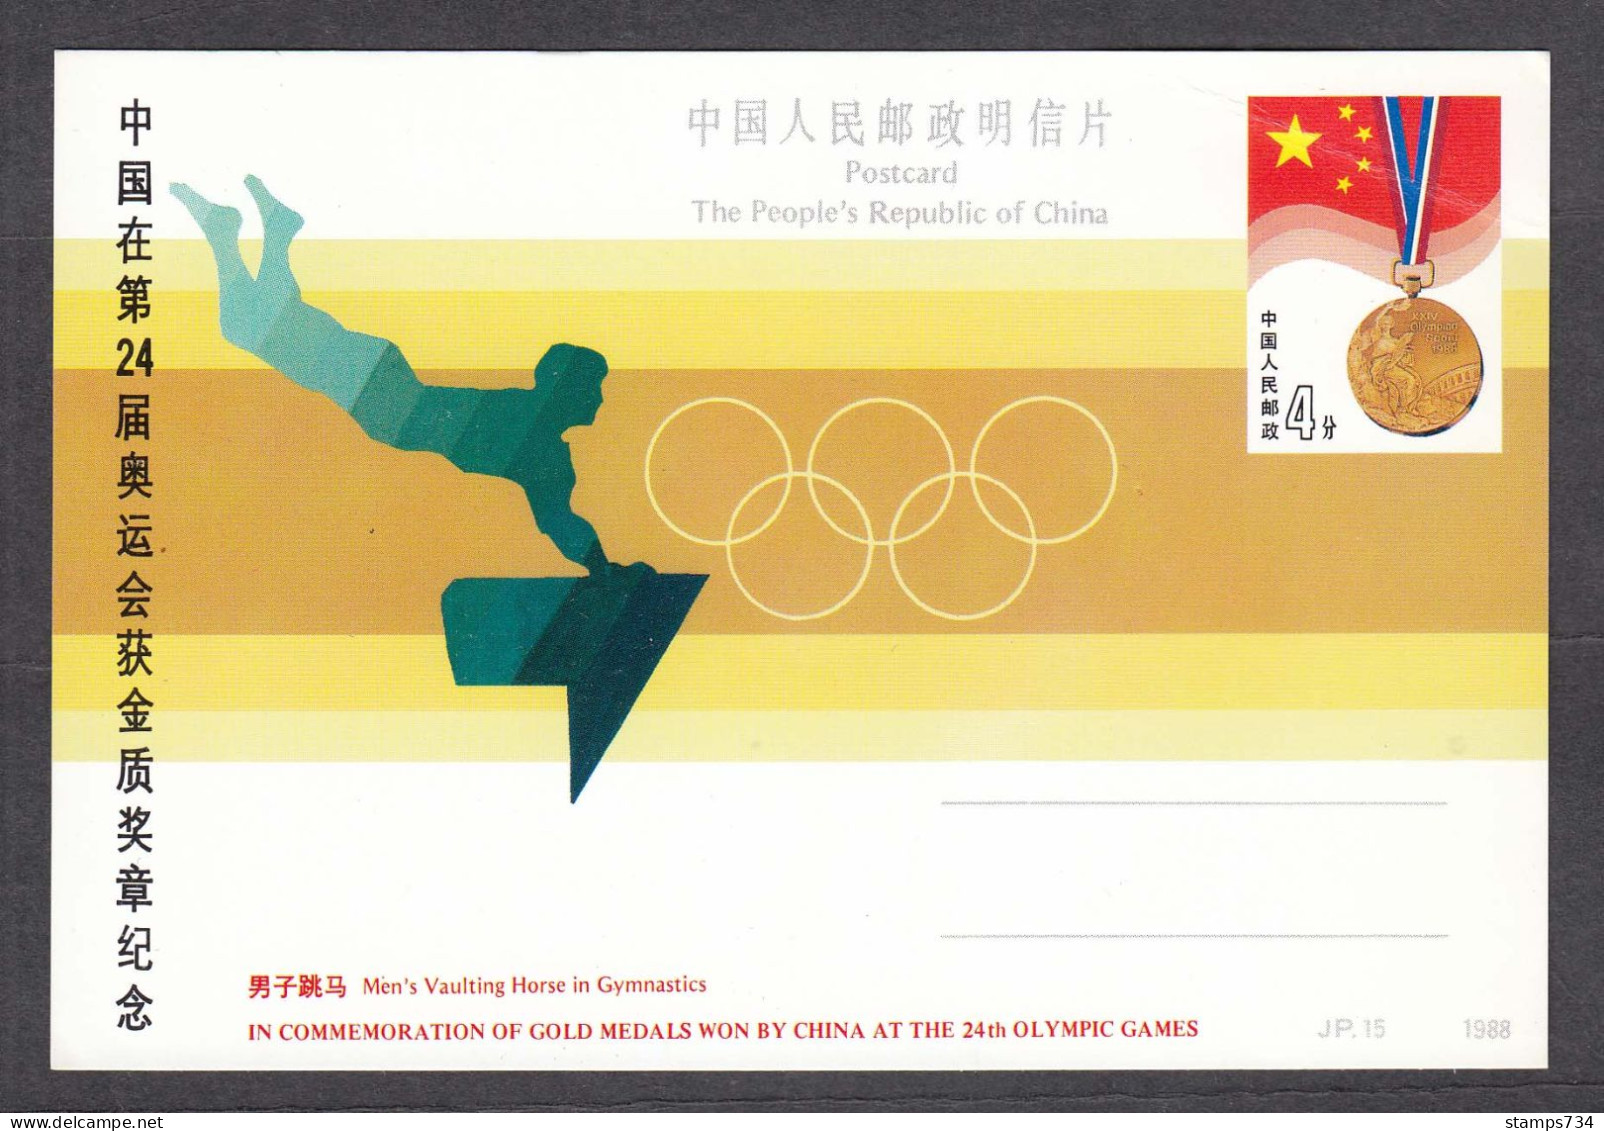 China 1988 - Gold Medals Won By China At The Olymp. Games,Seoul, Jumping On A Horse, Post. Stationery - Gymnastique